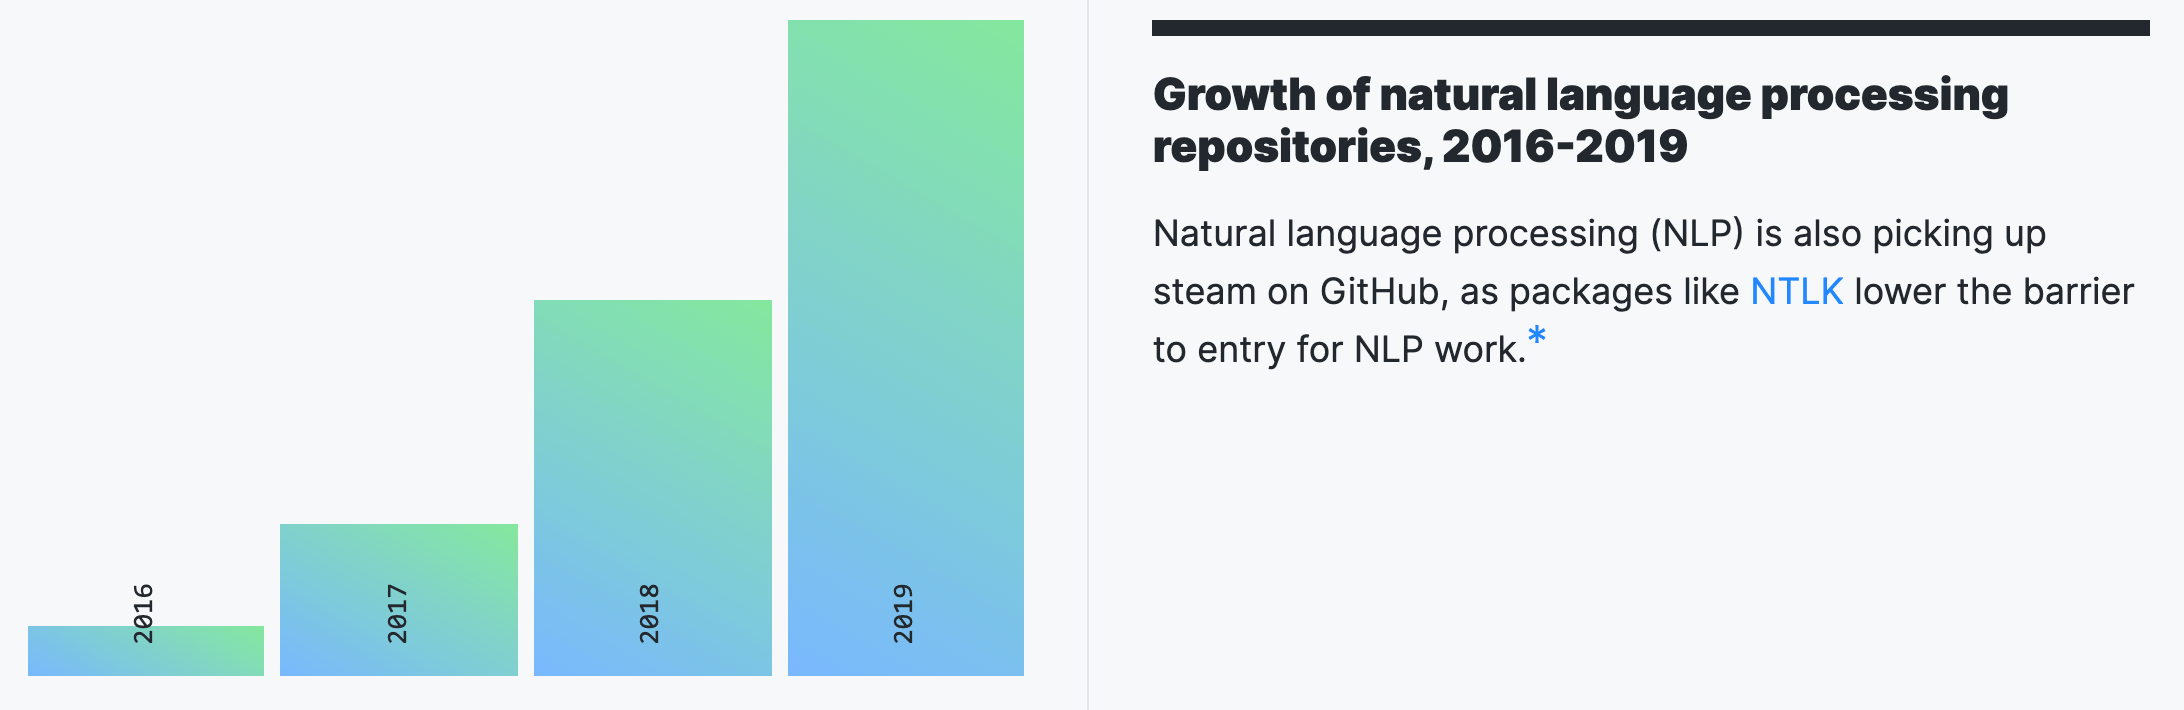 Growth of Natural Language Processing (NLP)